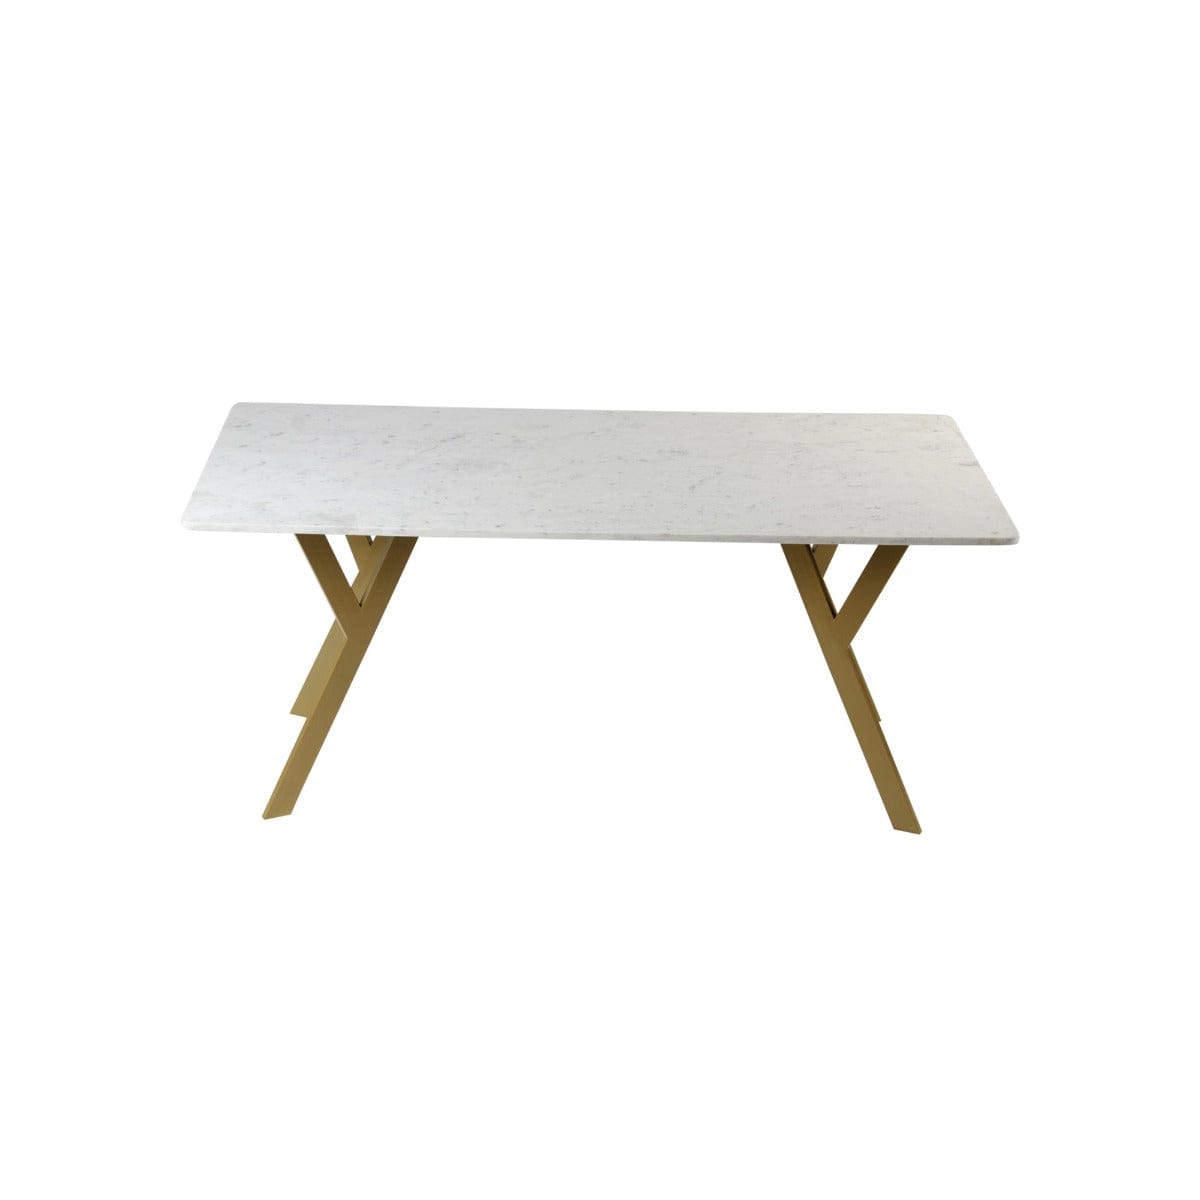 Kir 6 Seater Marble Dining Table In Gold Finish